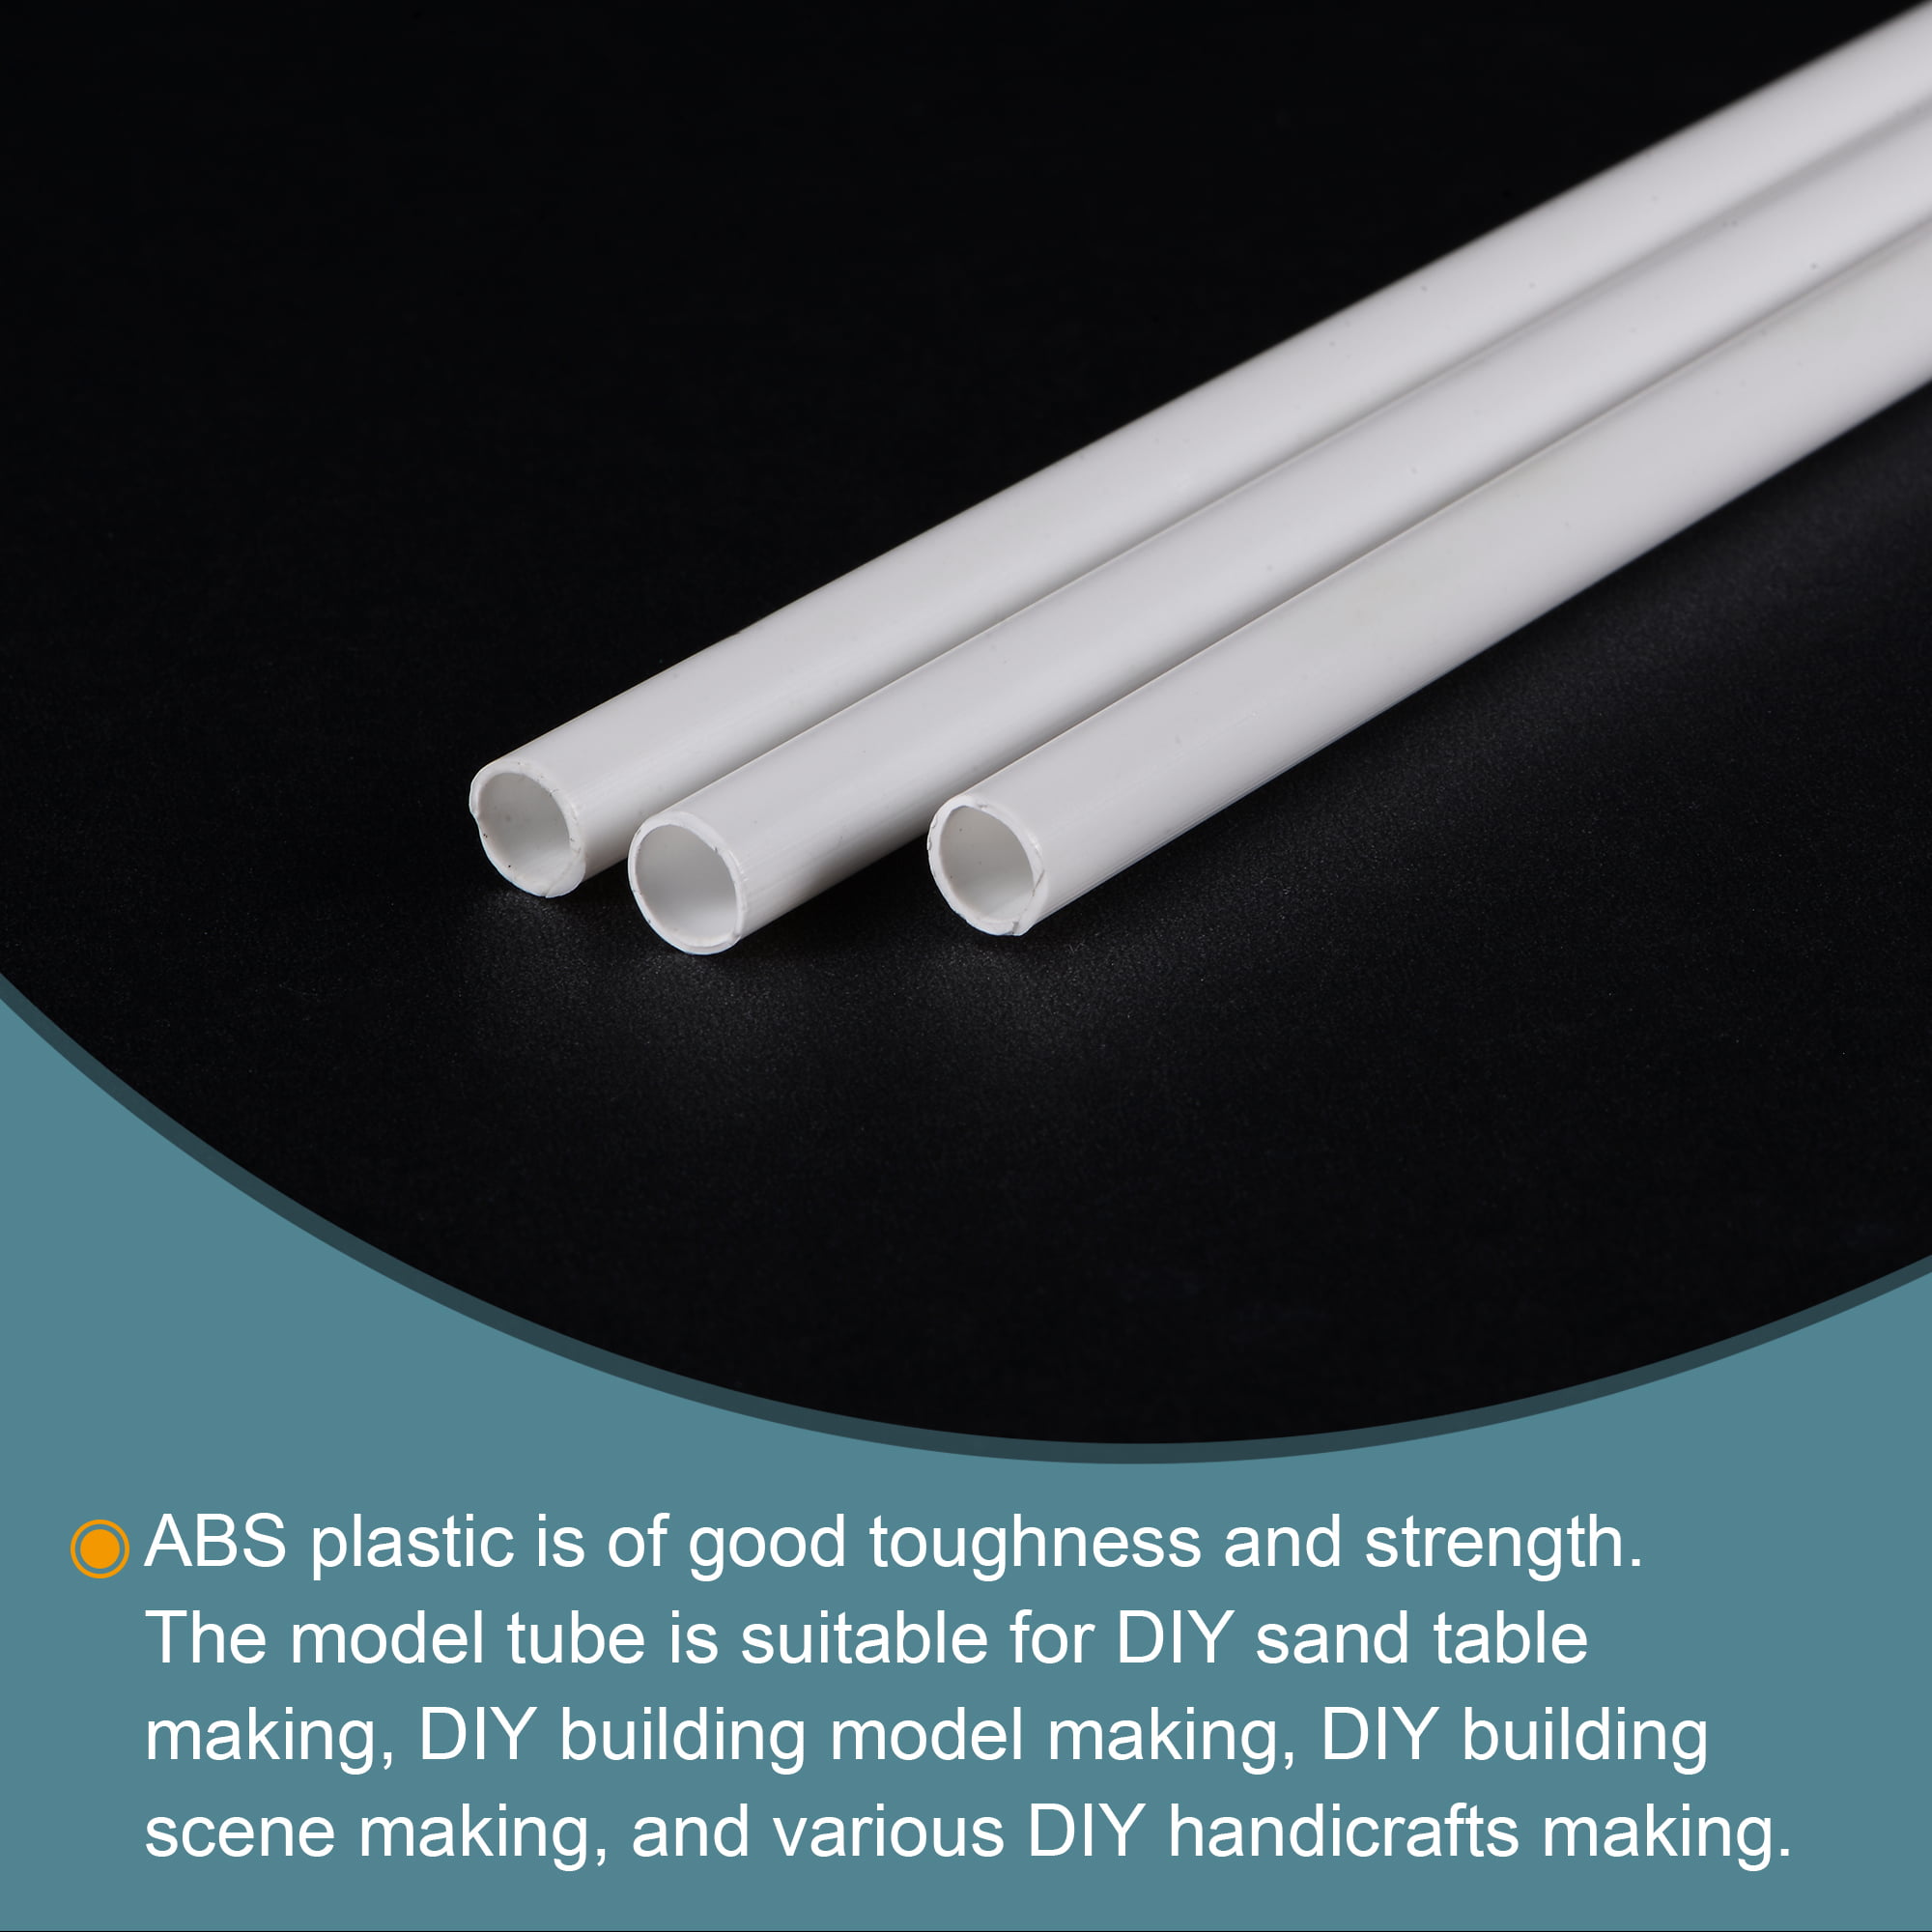 10Pcs White Plastic Rods Round Solid Bar DIY Model Material ABS Round Stick for DIY Sand Table Model,DIY Toys Doll House,DIY Scene Making,Building Making,Length 250mm,Diameter 1mm 2mm 3mm 4mm 5mm 6mm 